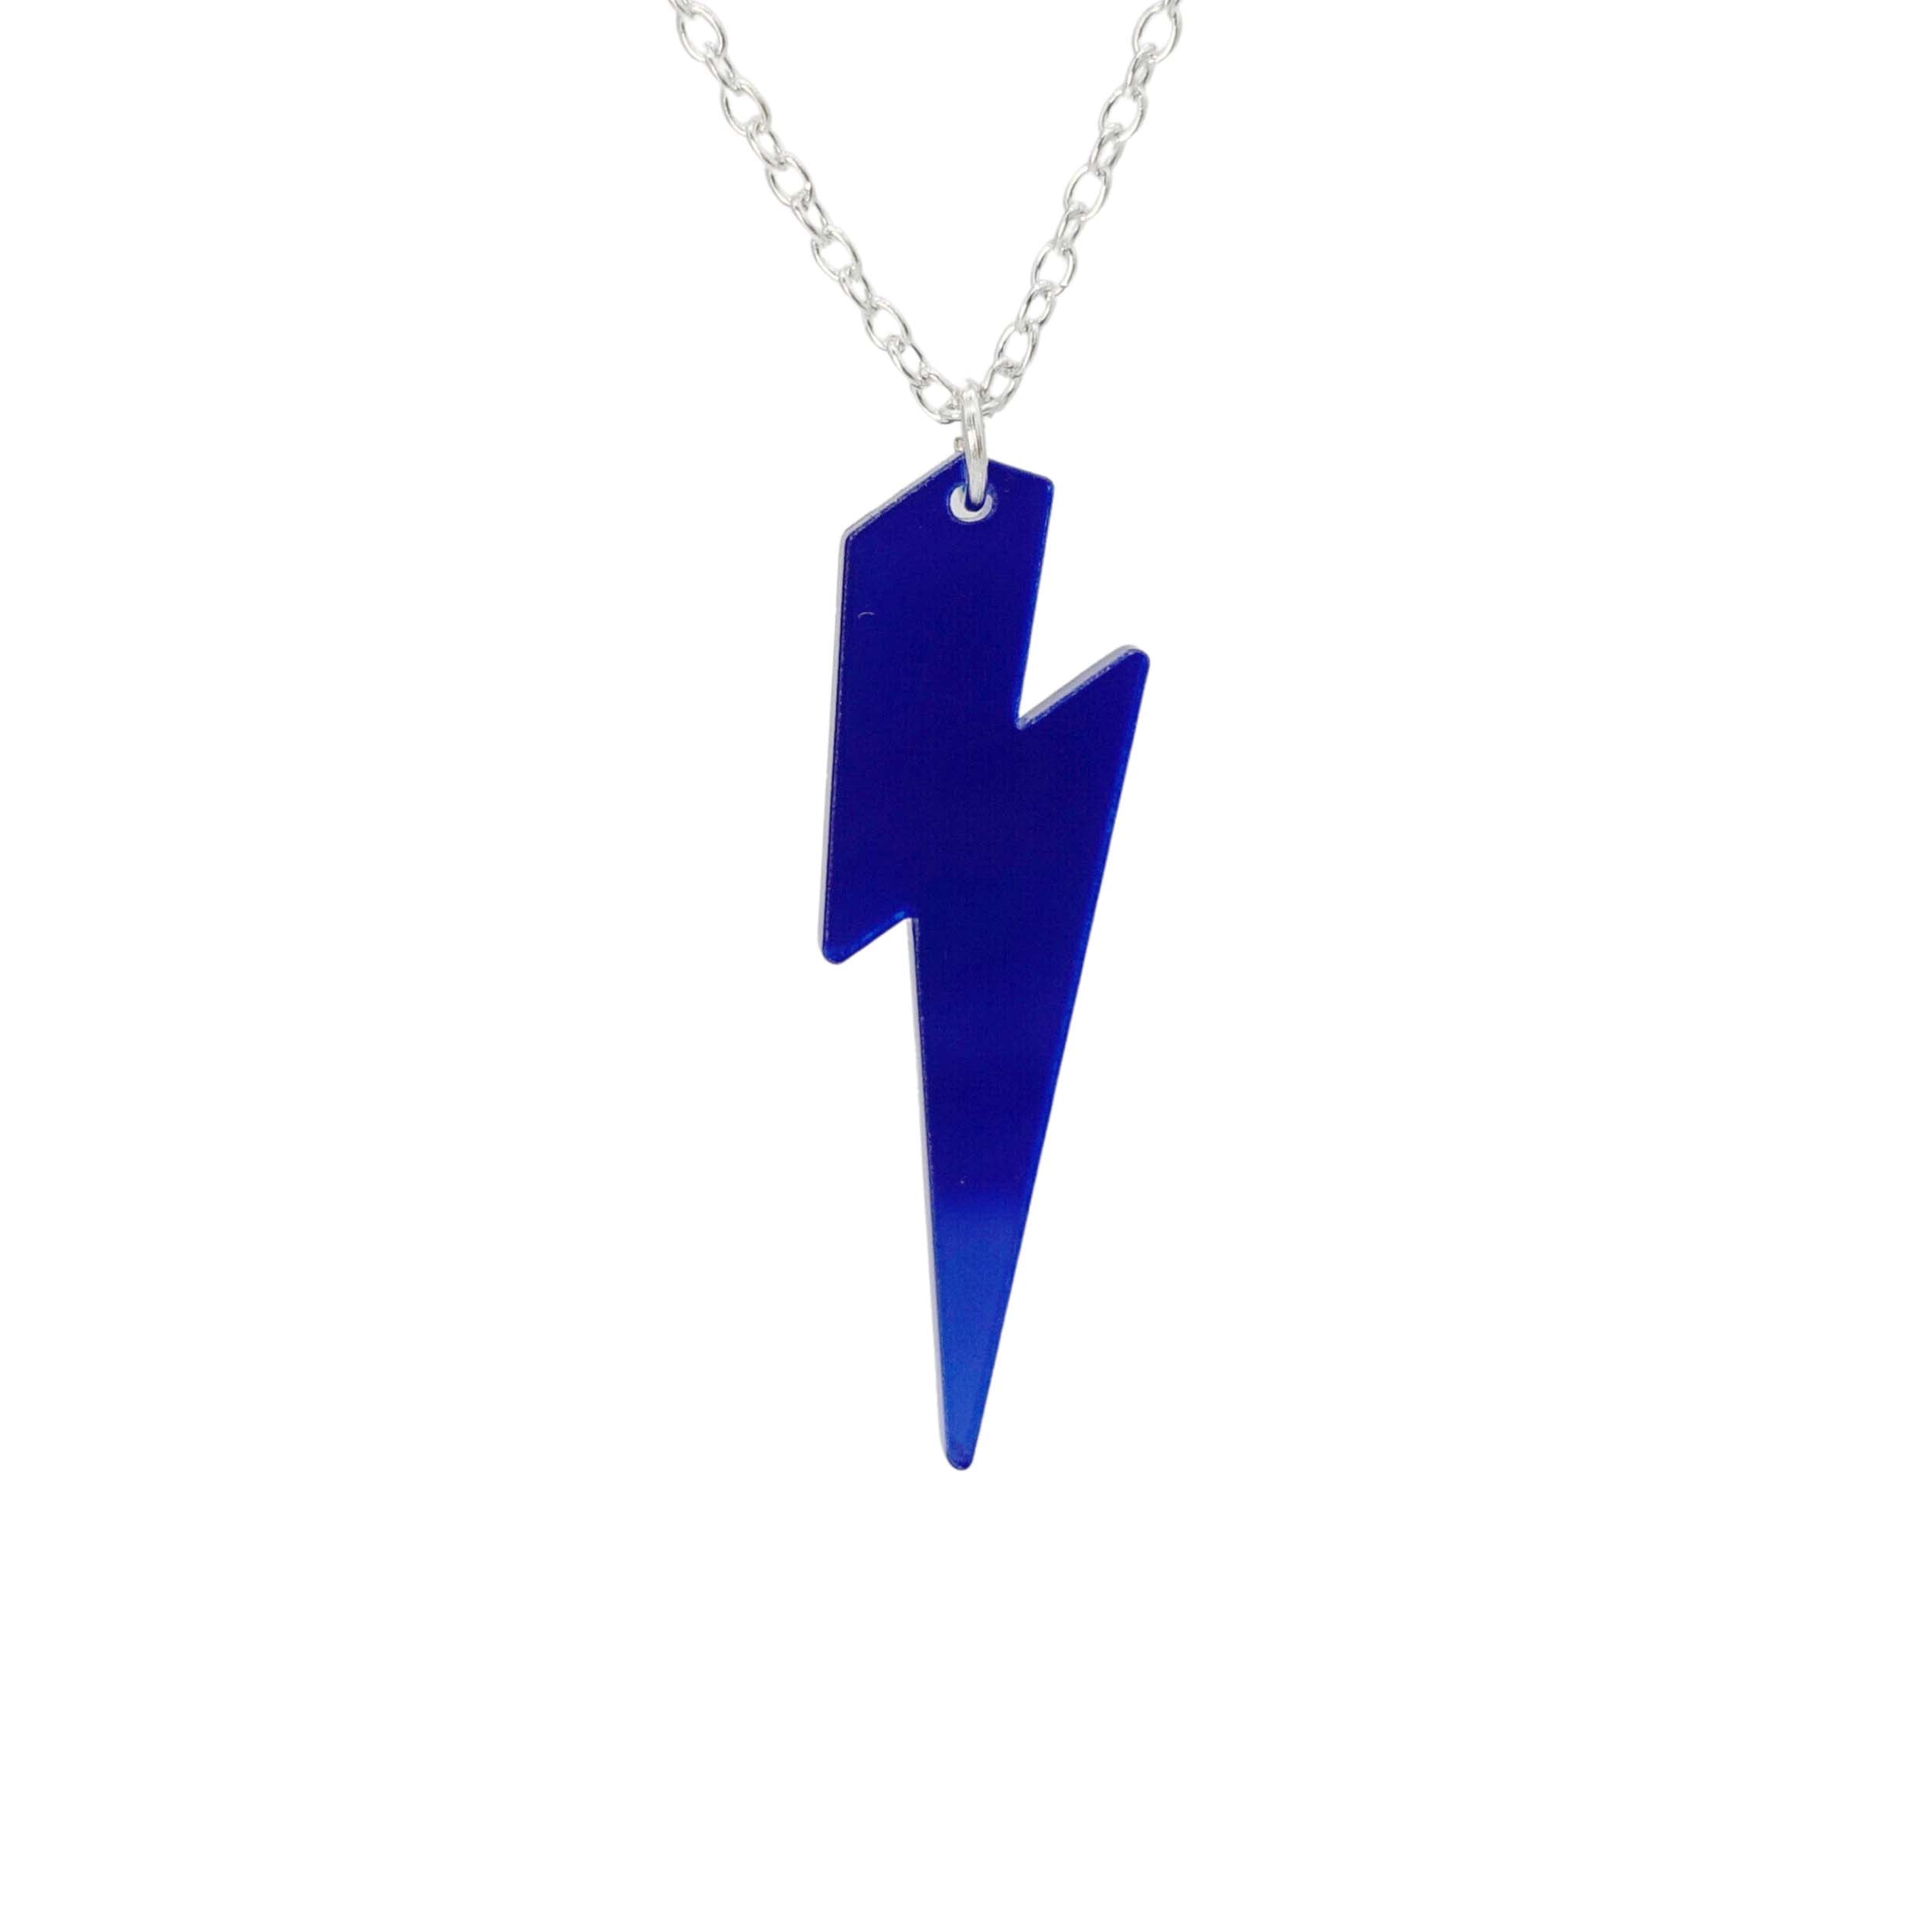 Electric blue Lightning Bolt necklace shown hanging against a white background. 